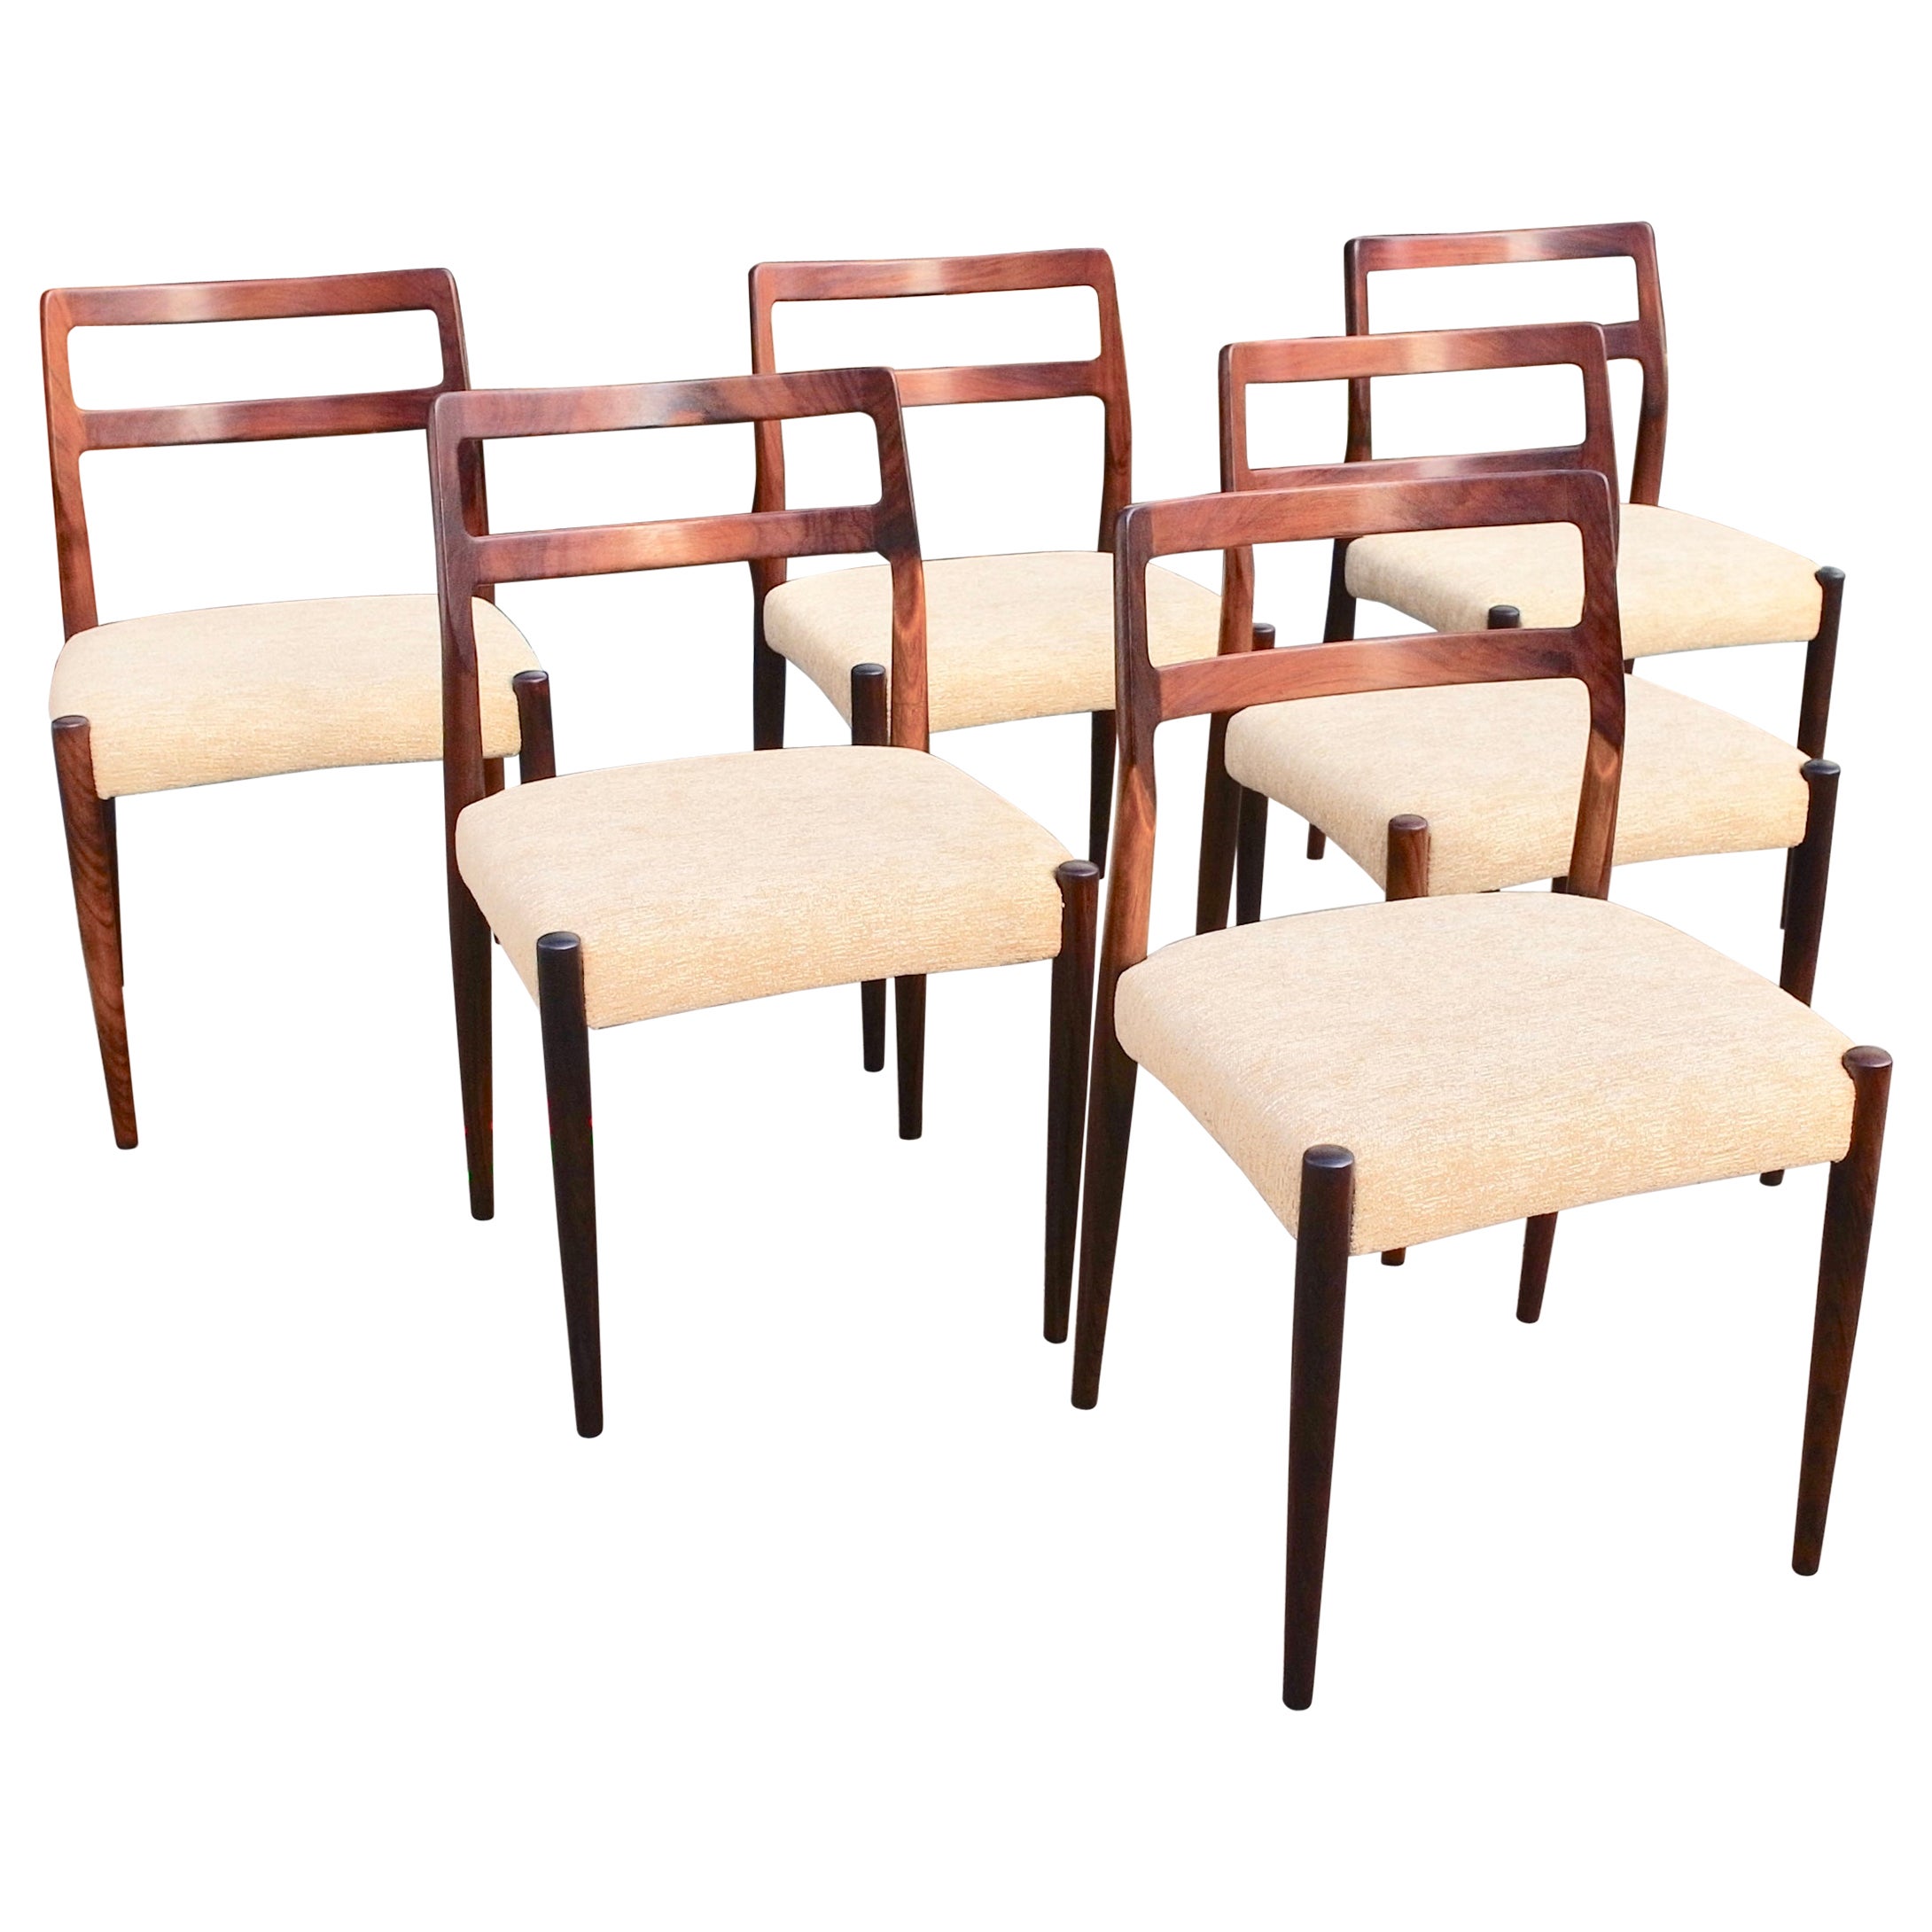 Six Vintage Danish Hardwood 1960s Dining Chairs by Johannes Andersen For Sale